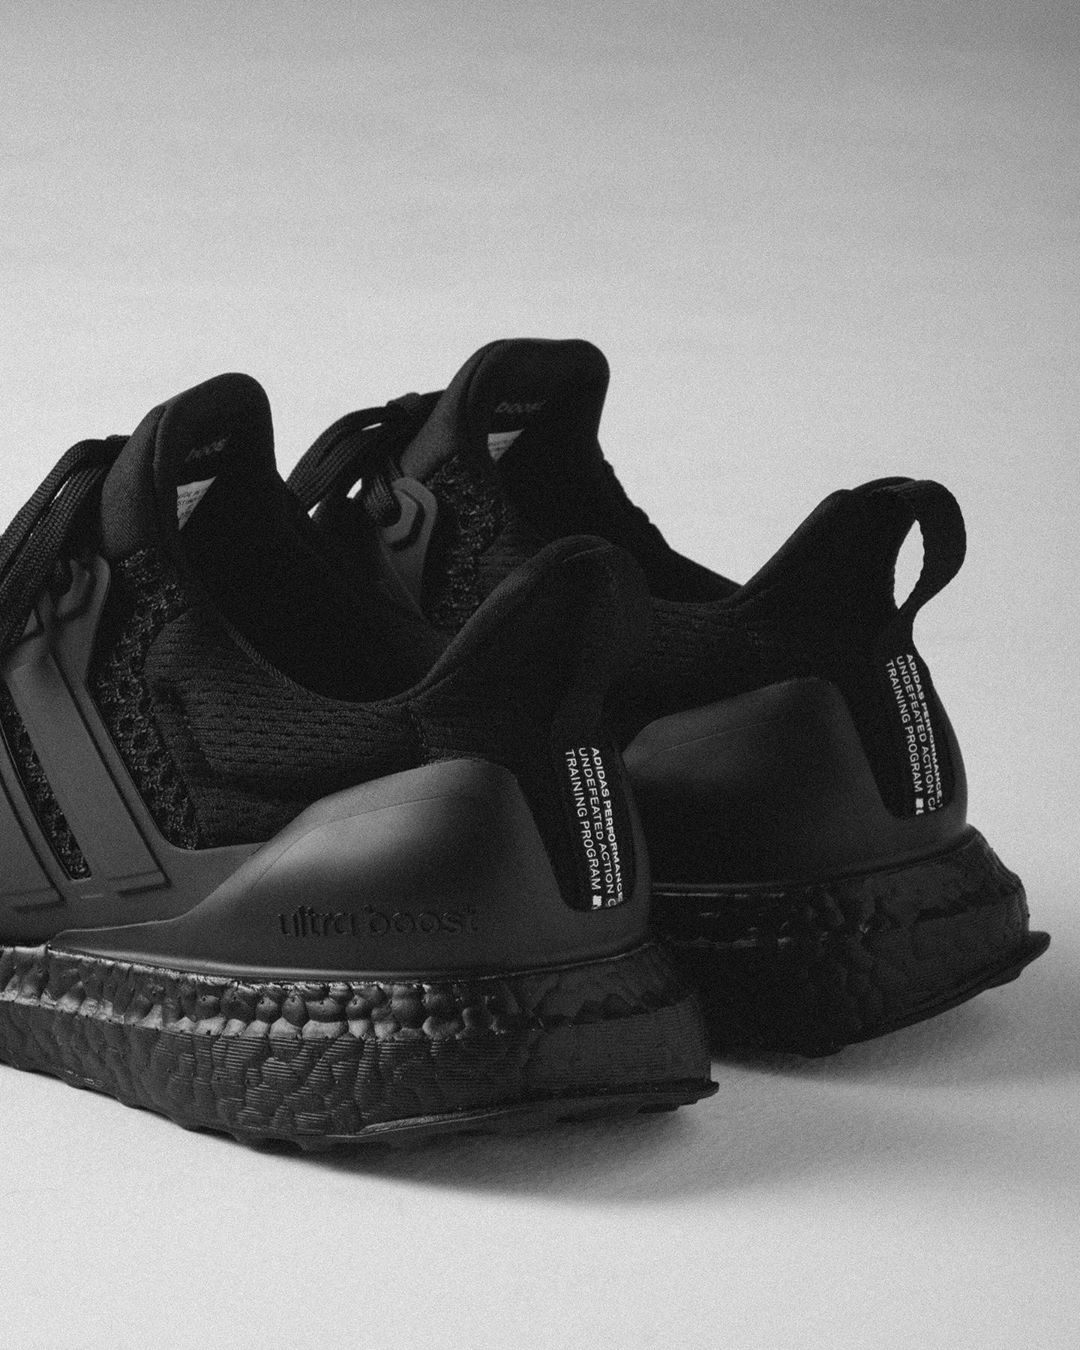 UNDEFEATED adidas ULTRA BOOST 1.0 LEAK TOKYO